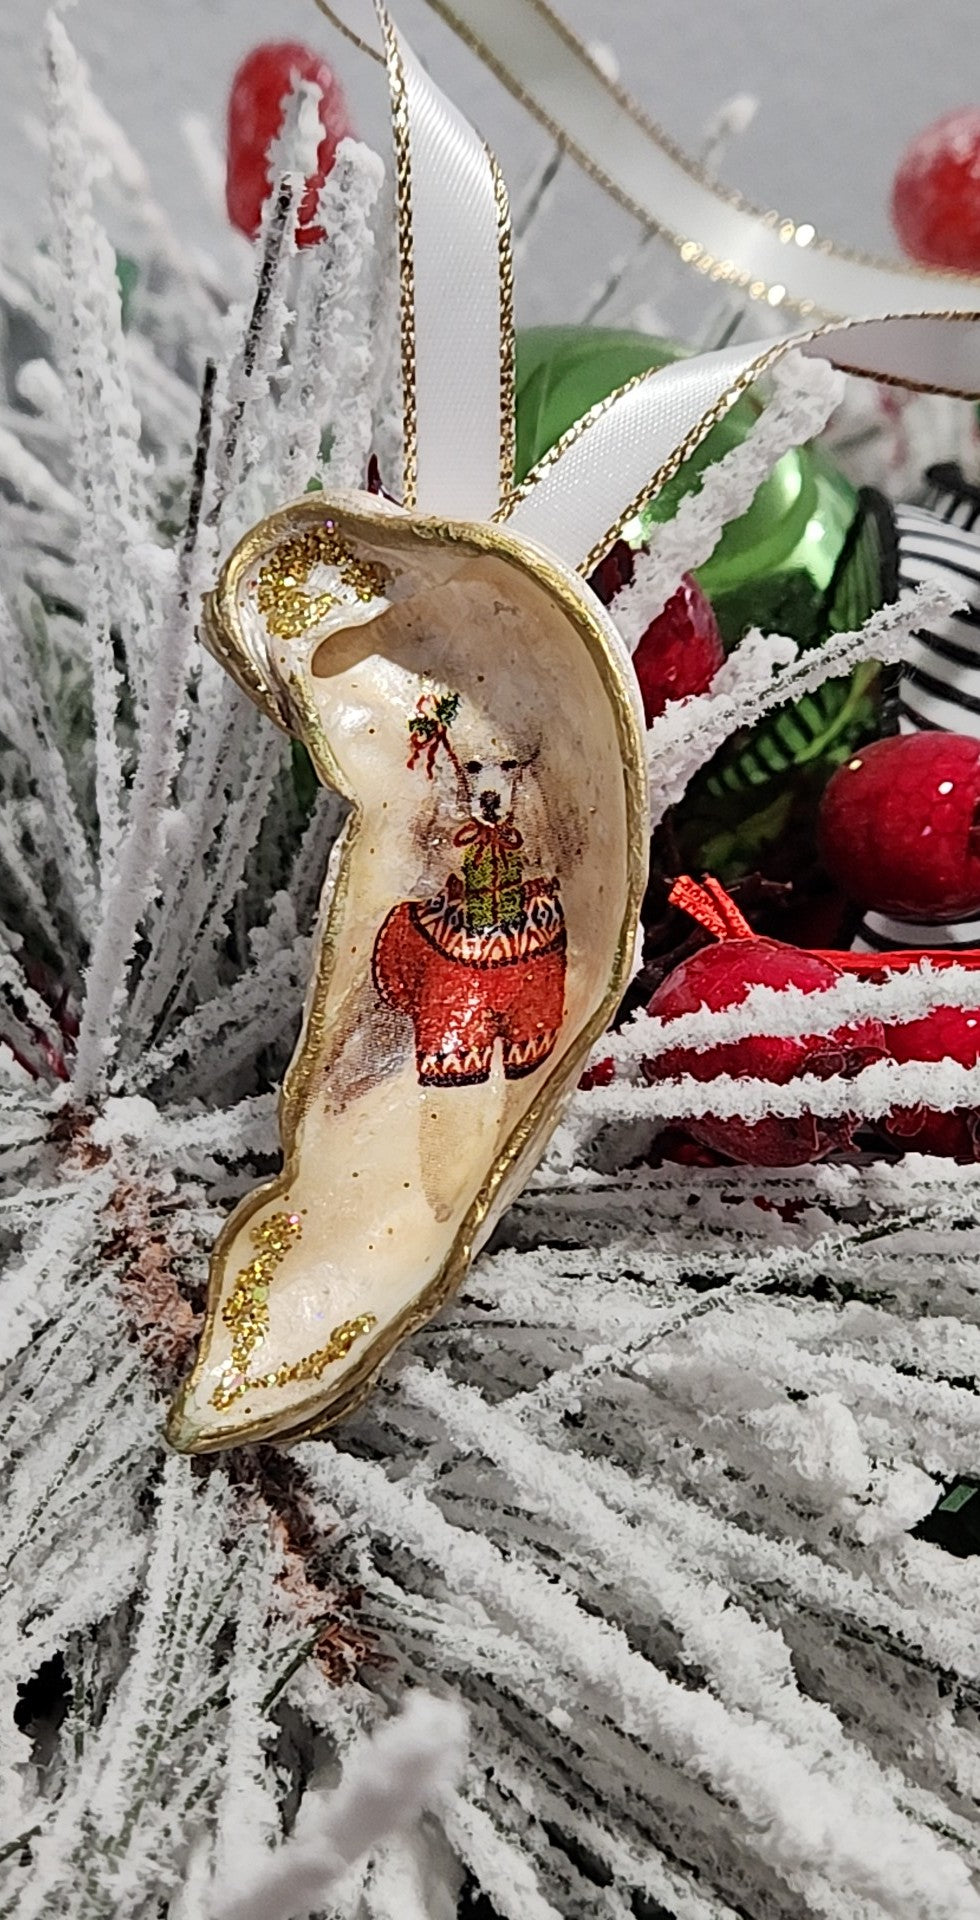 Christmas Novelty Dog Ornament Multiple Breeds Local Oyster Shell Hand Decorated